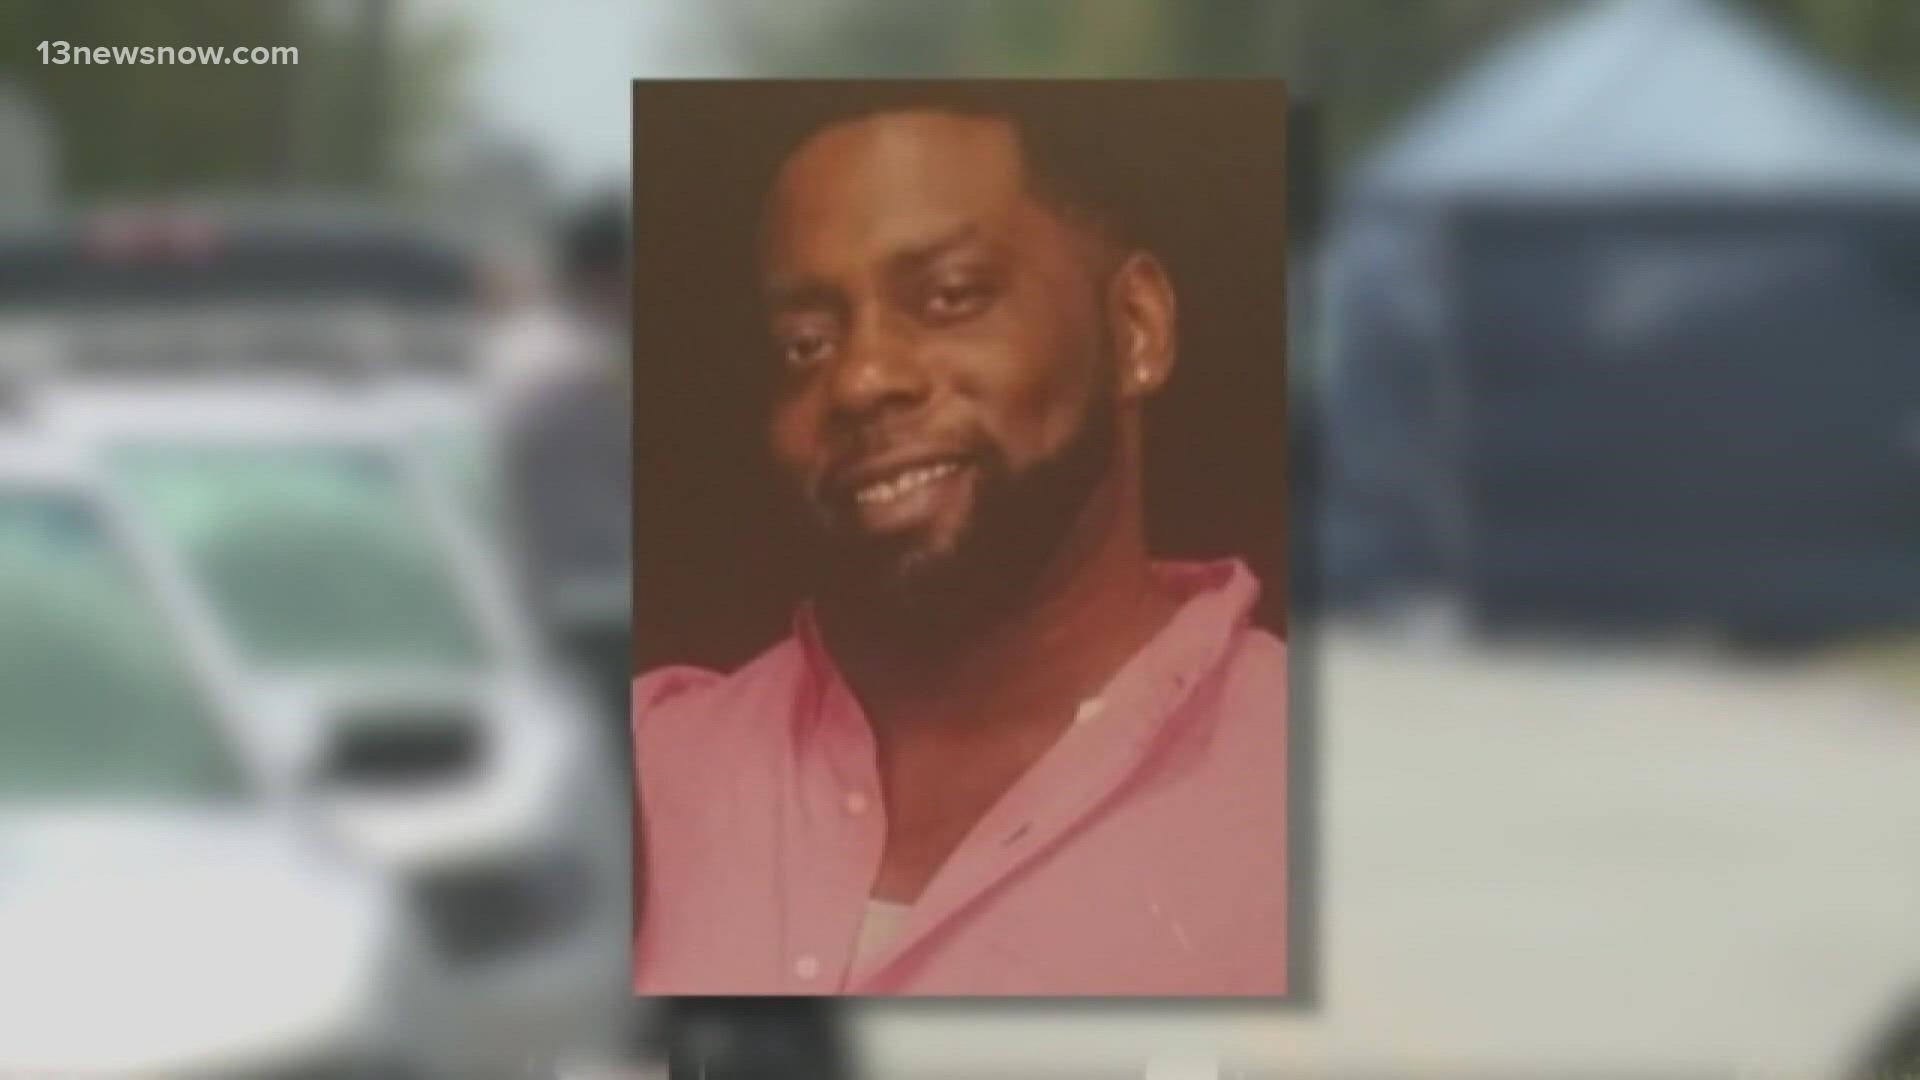 Pasquotank County deputies shot and killed Brown last year while serving warrants in Elizabeth City.